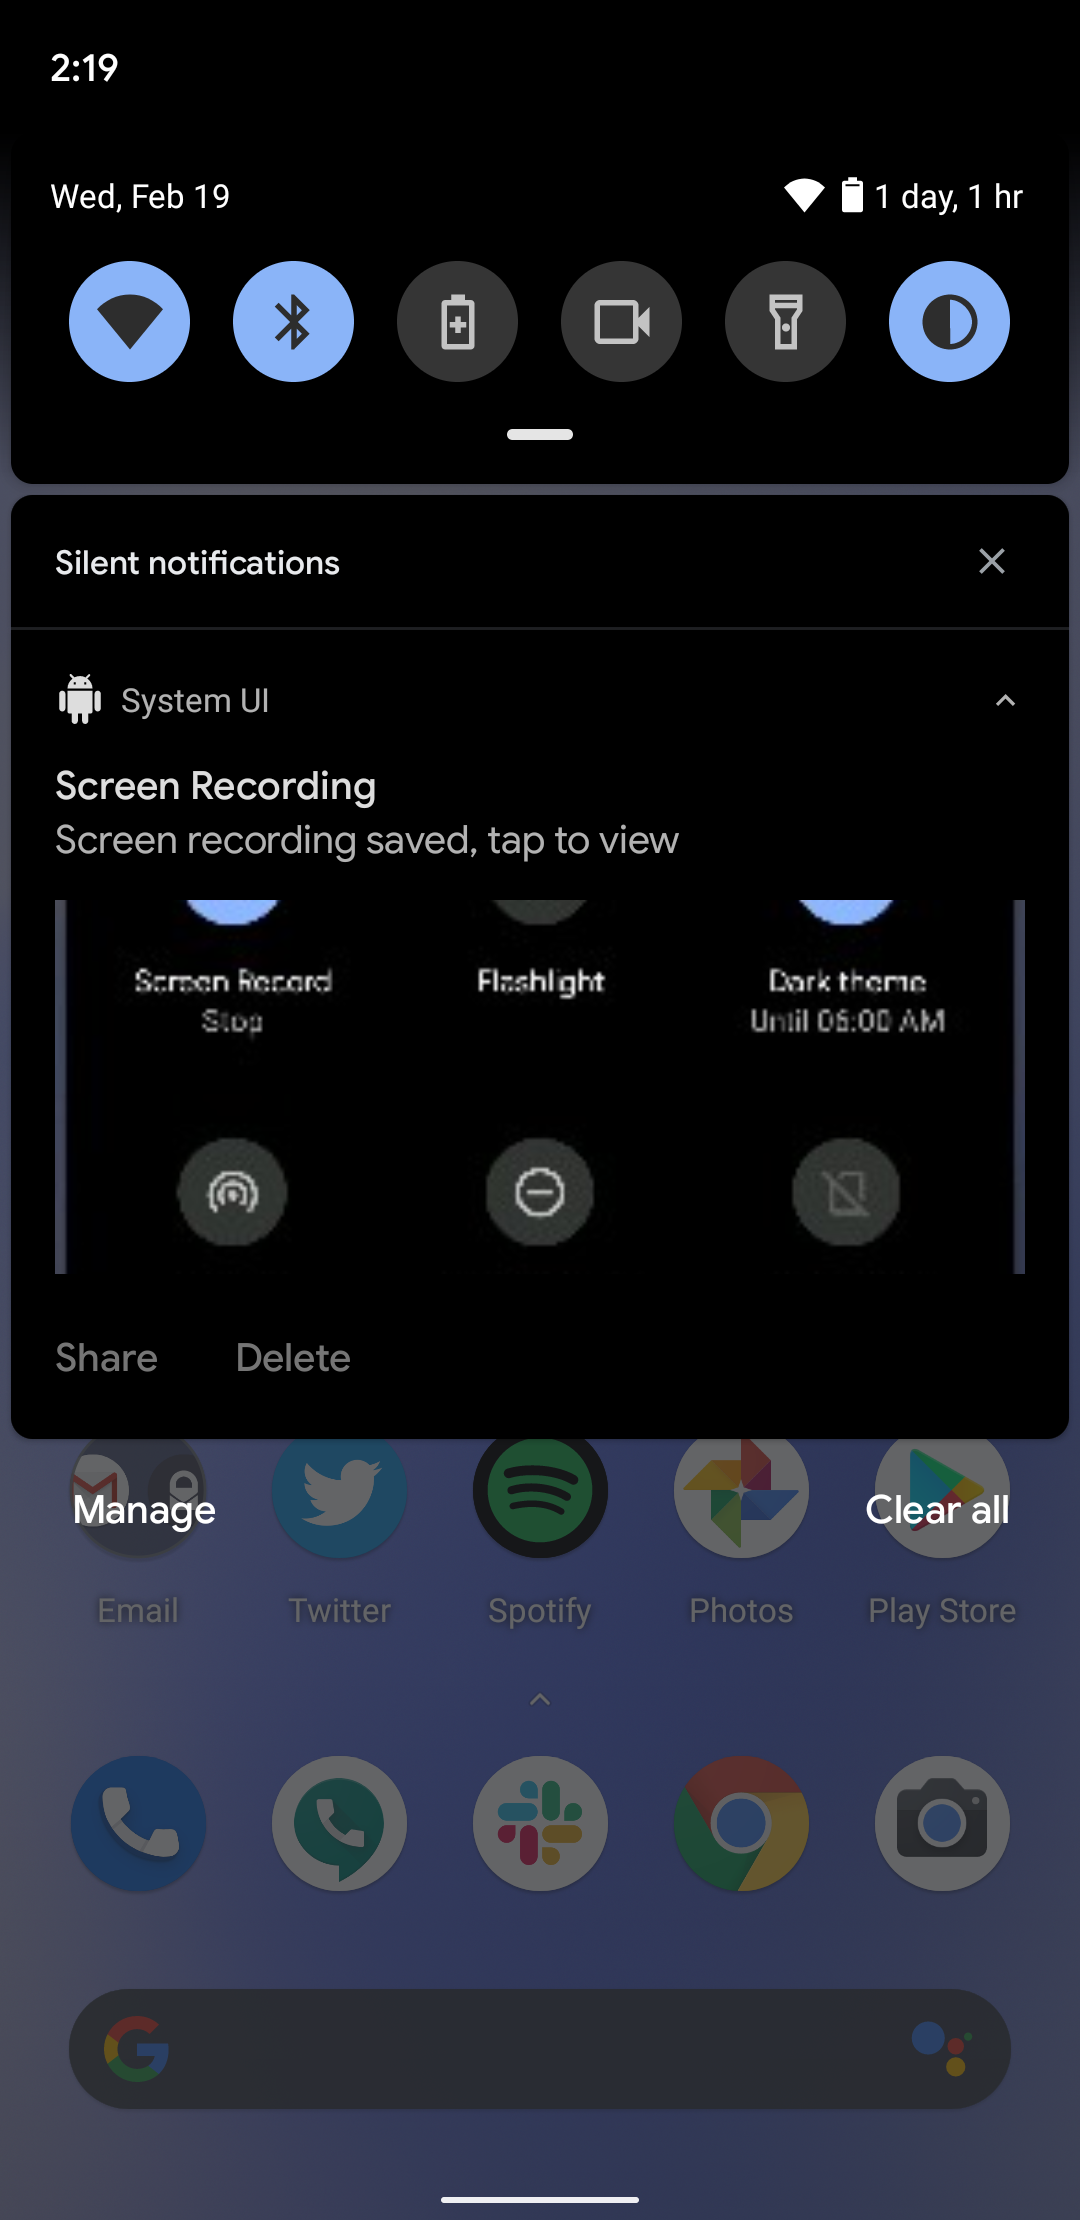 download the new version for android iTop Screen Recorder Pro 4.1.0.879